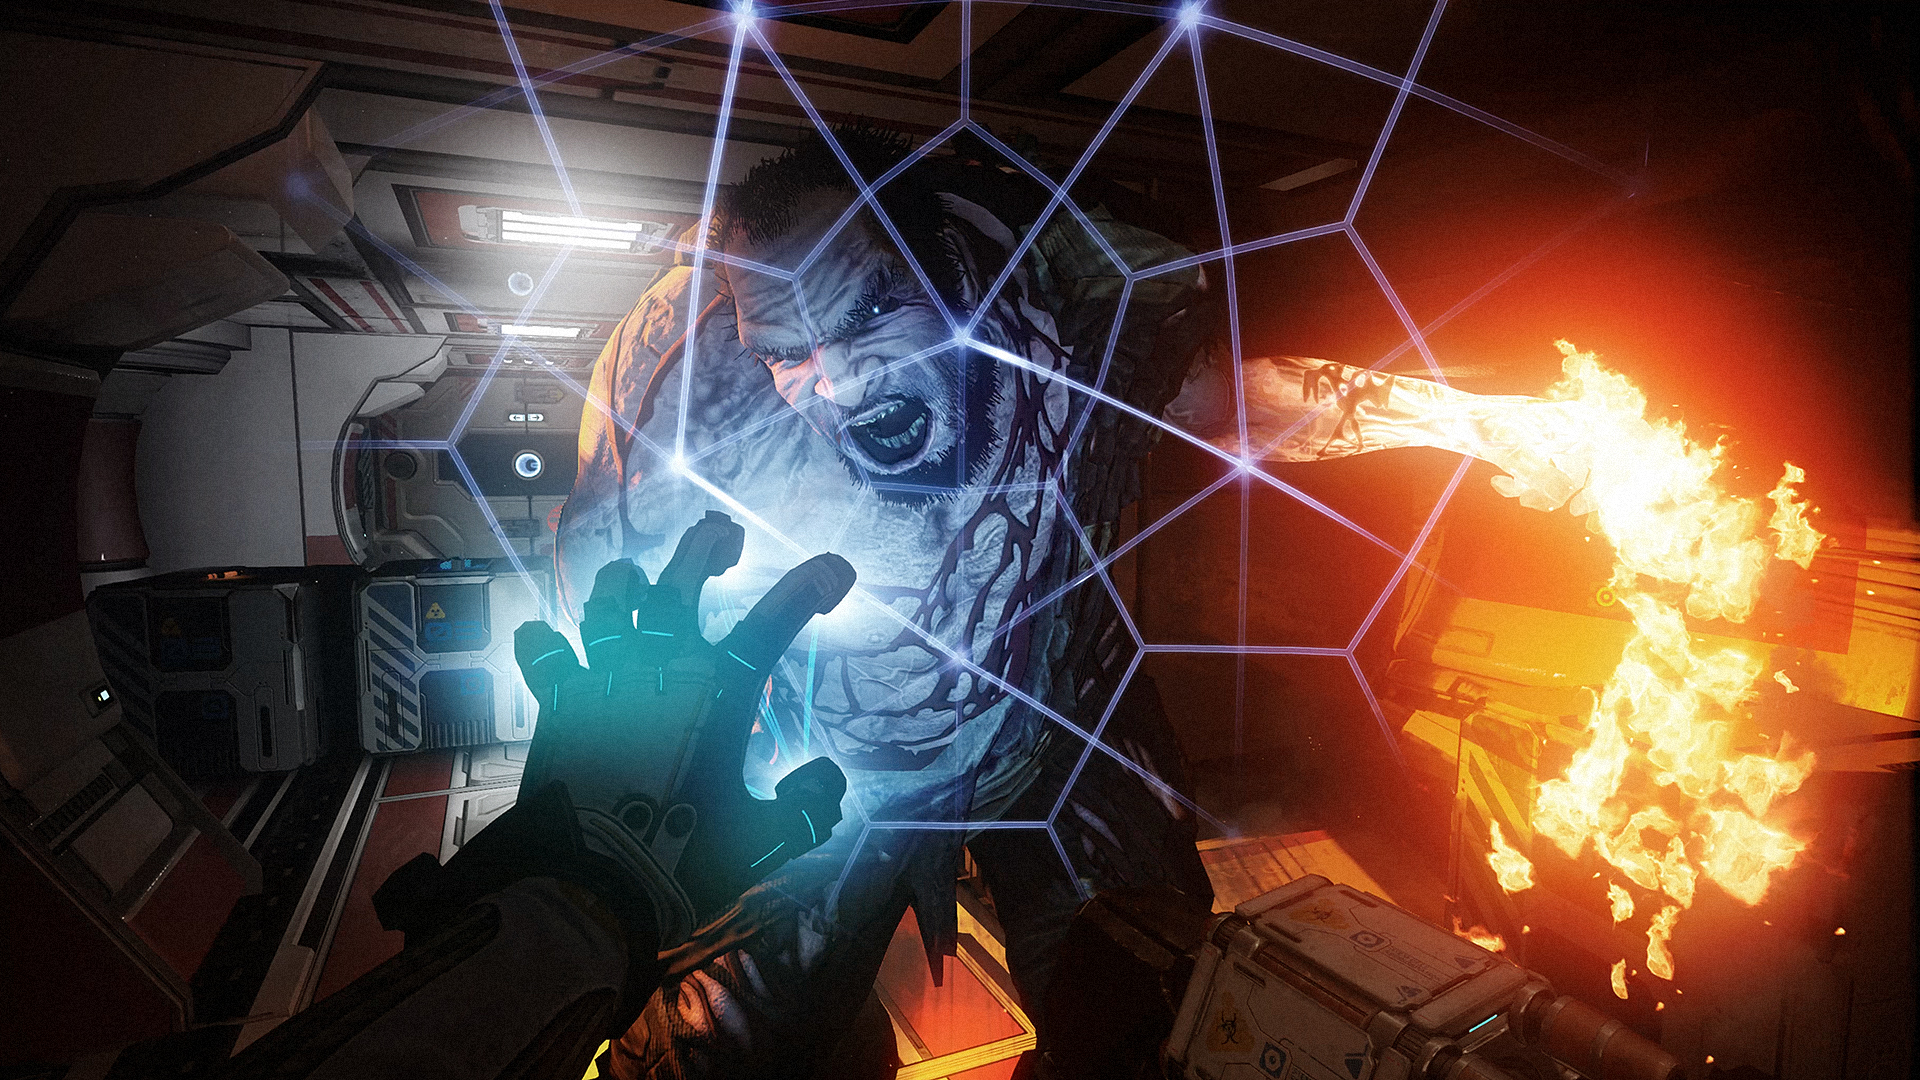 The Persistence July 2018 #5